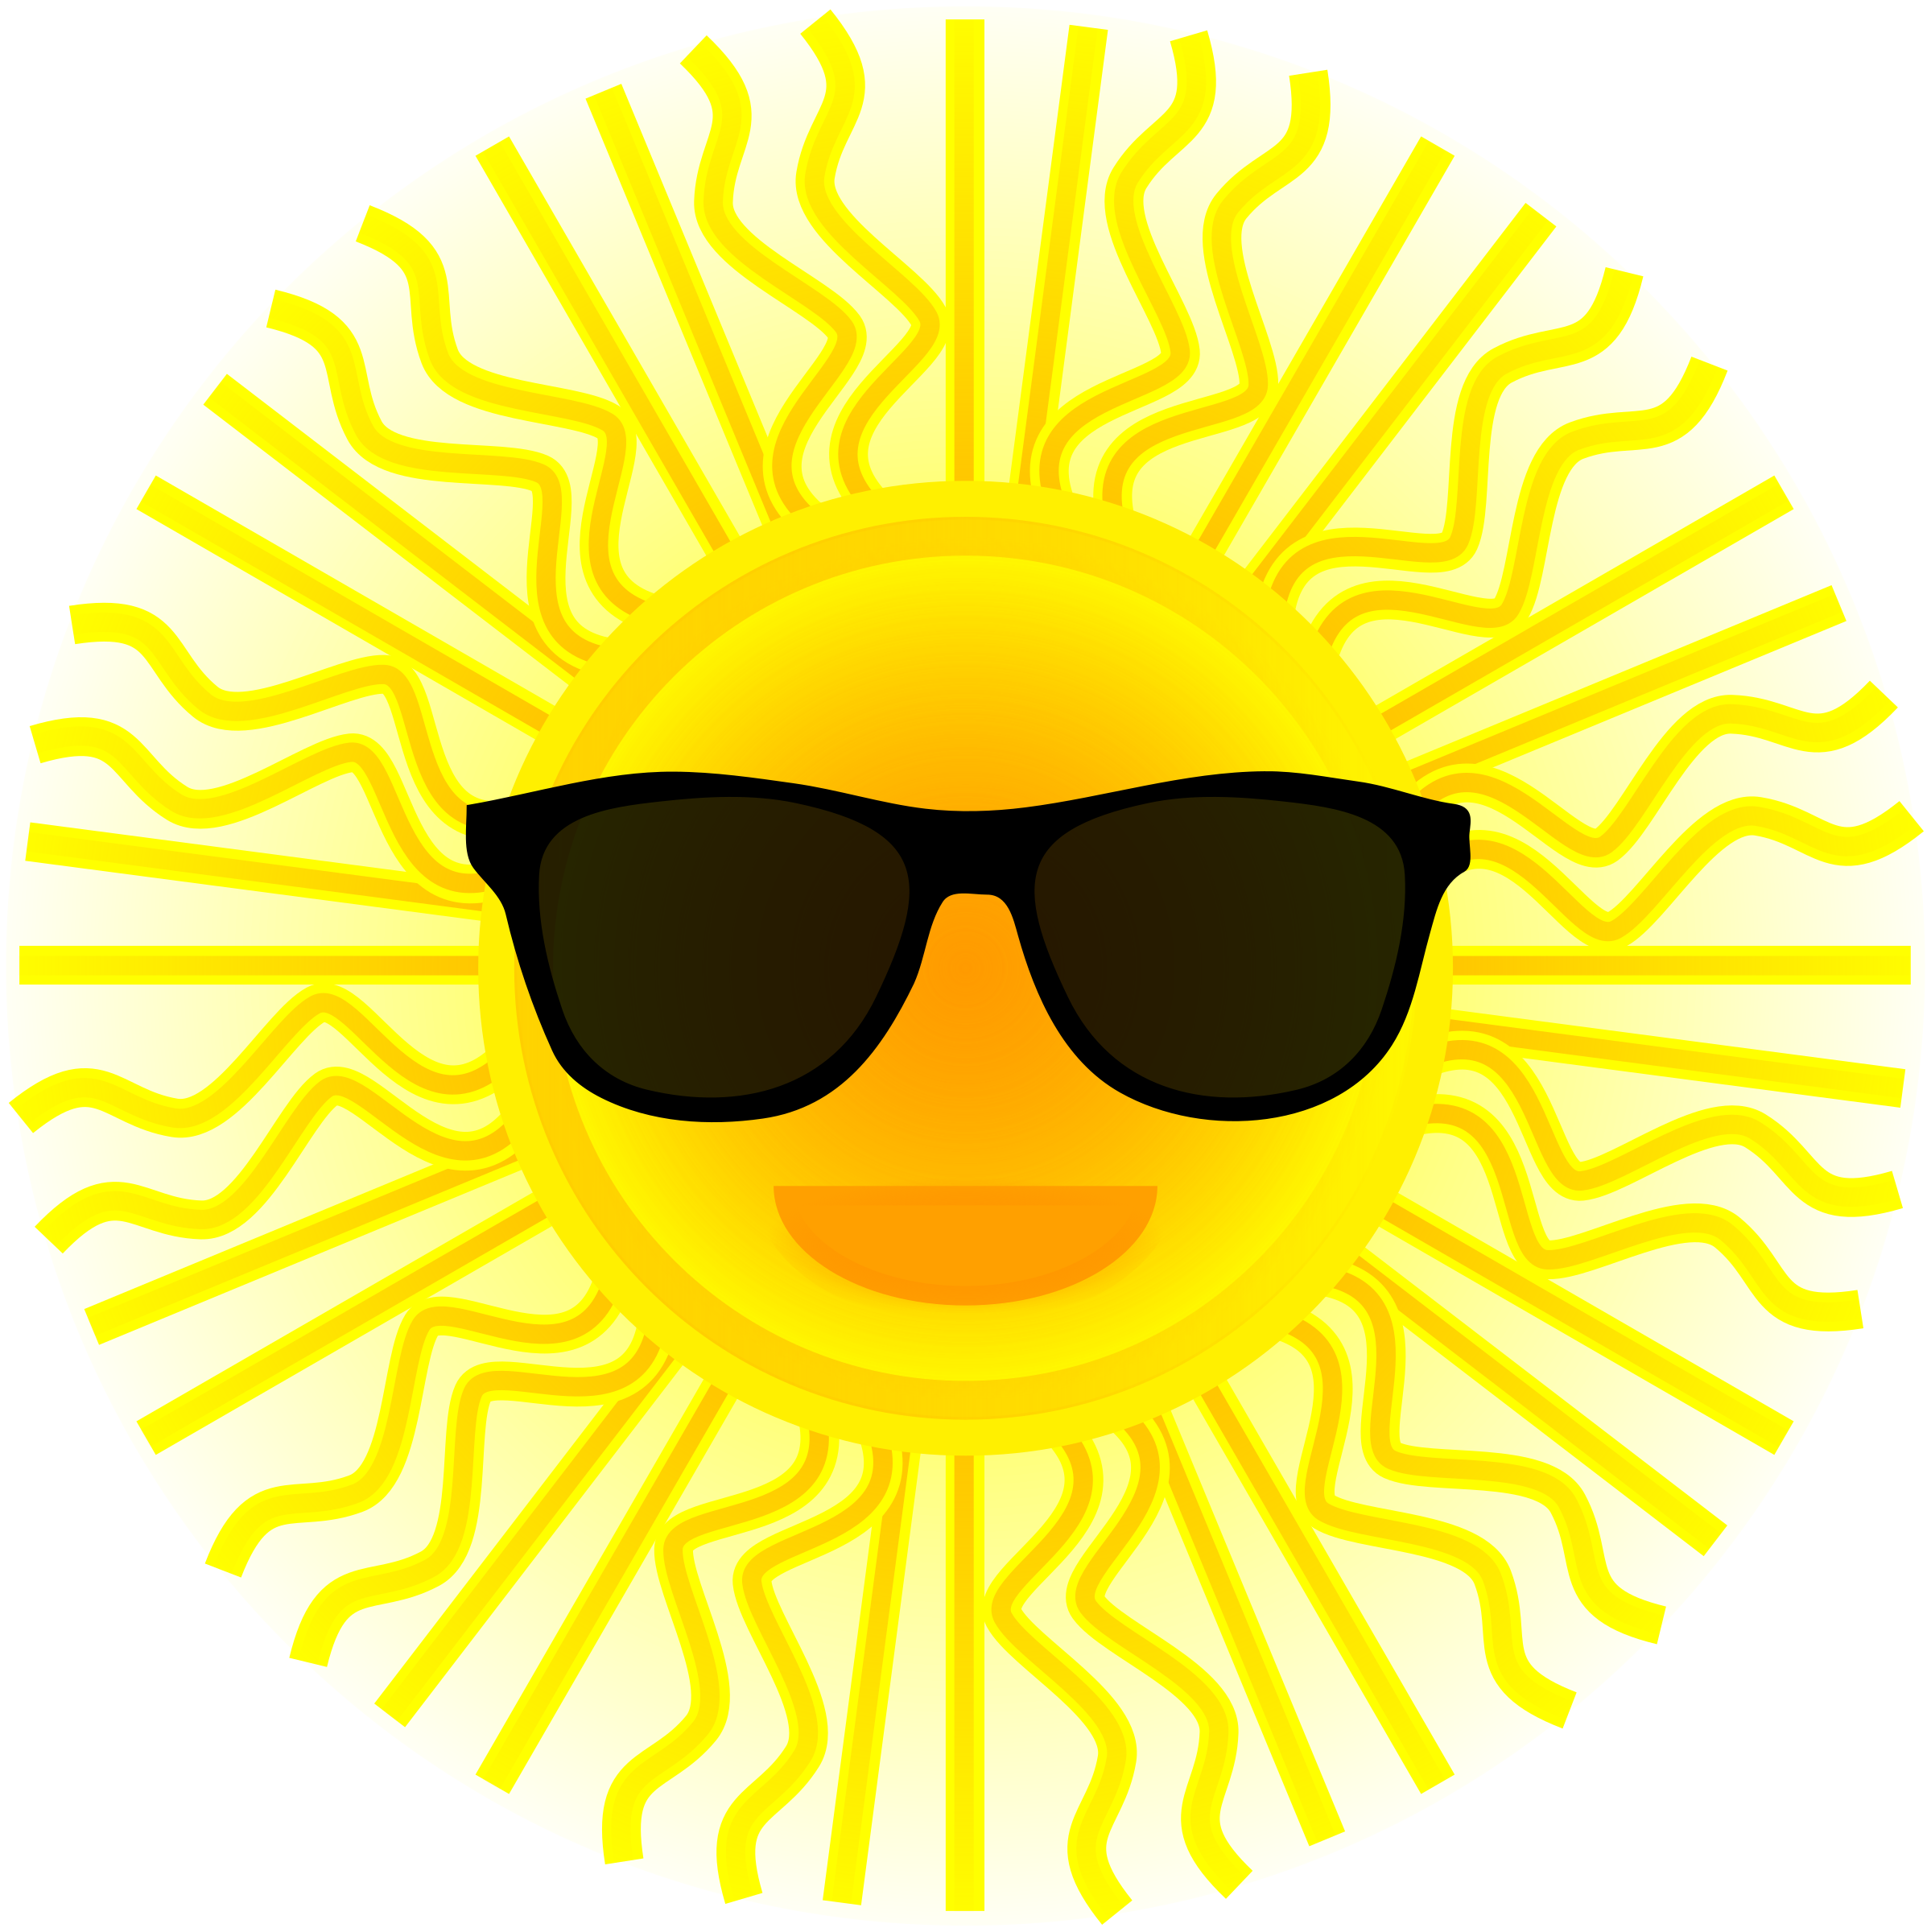 sun with sunglasses clipart - Clipground